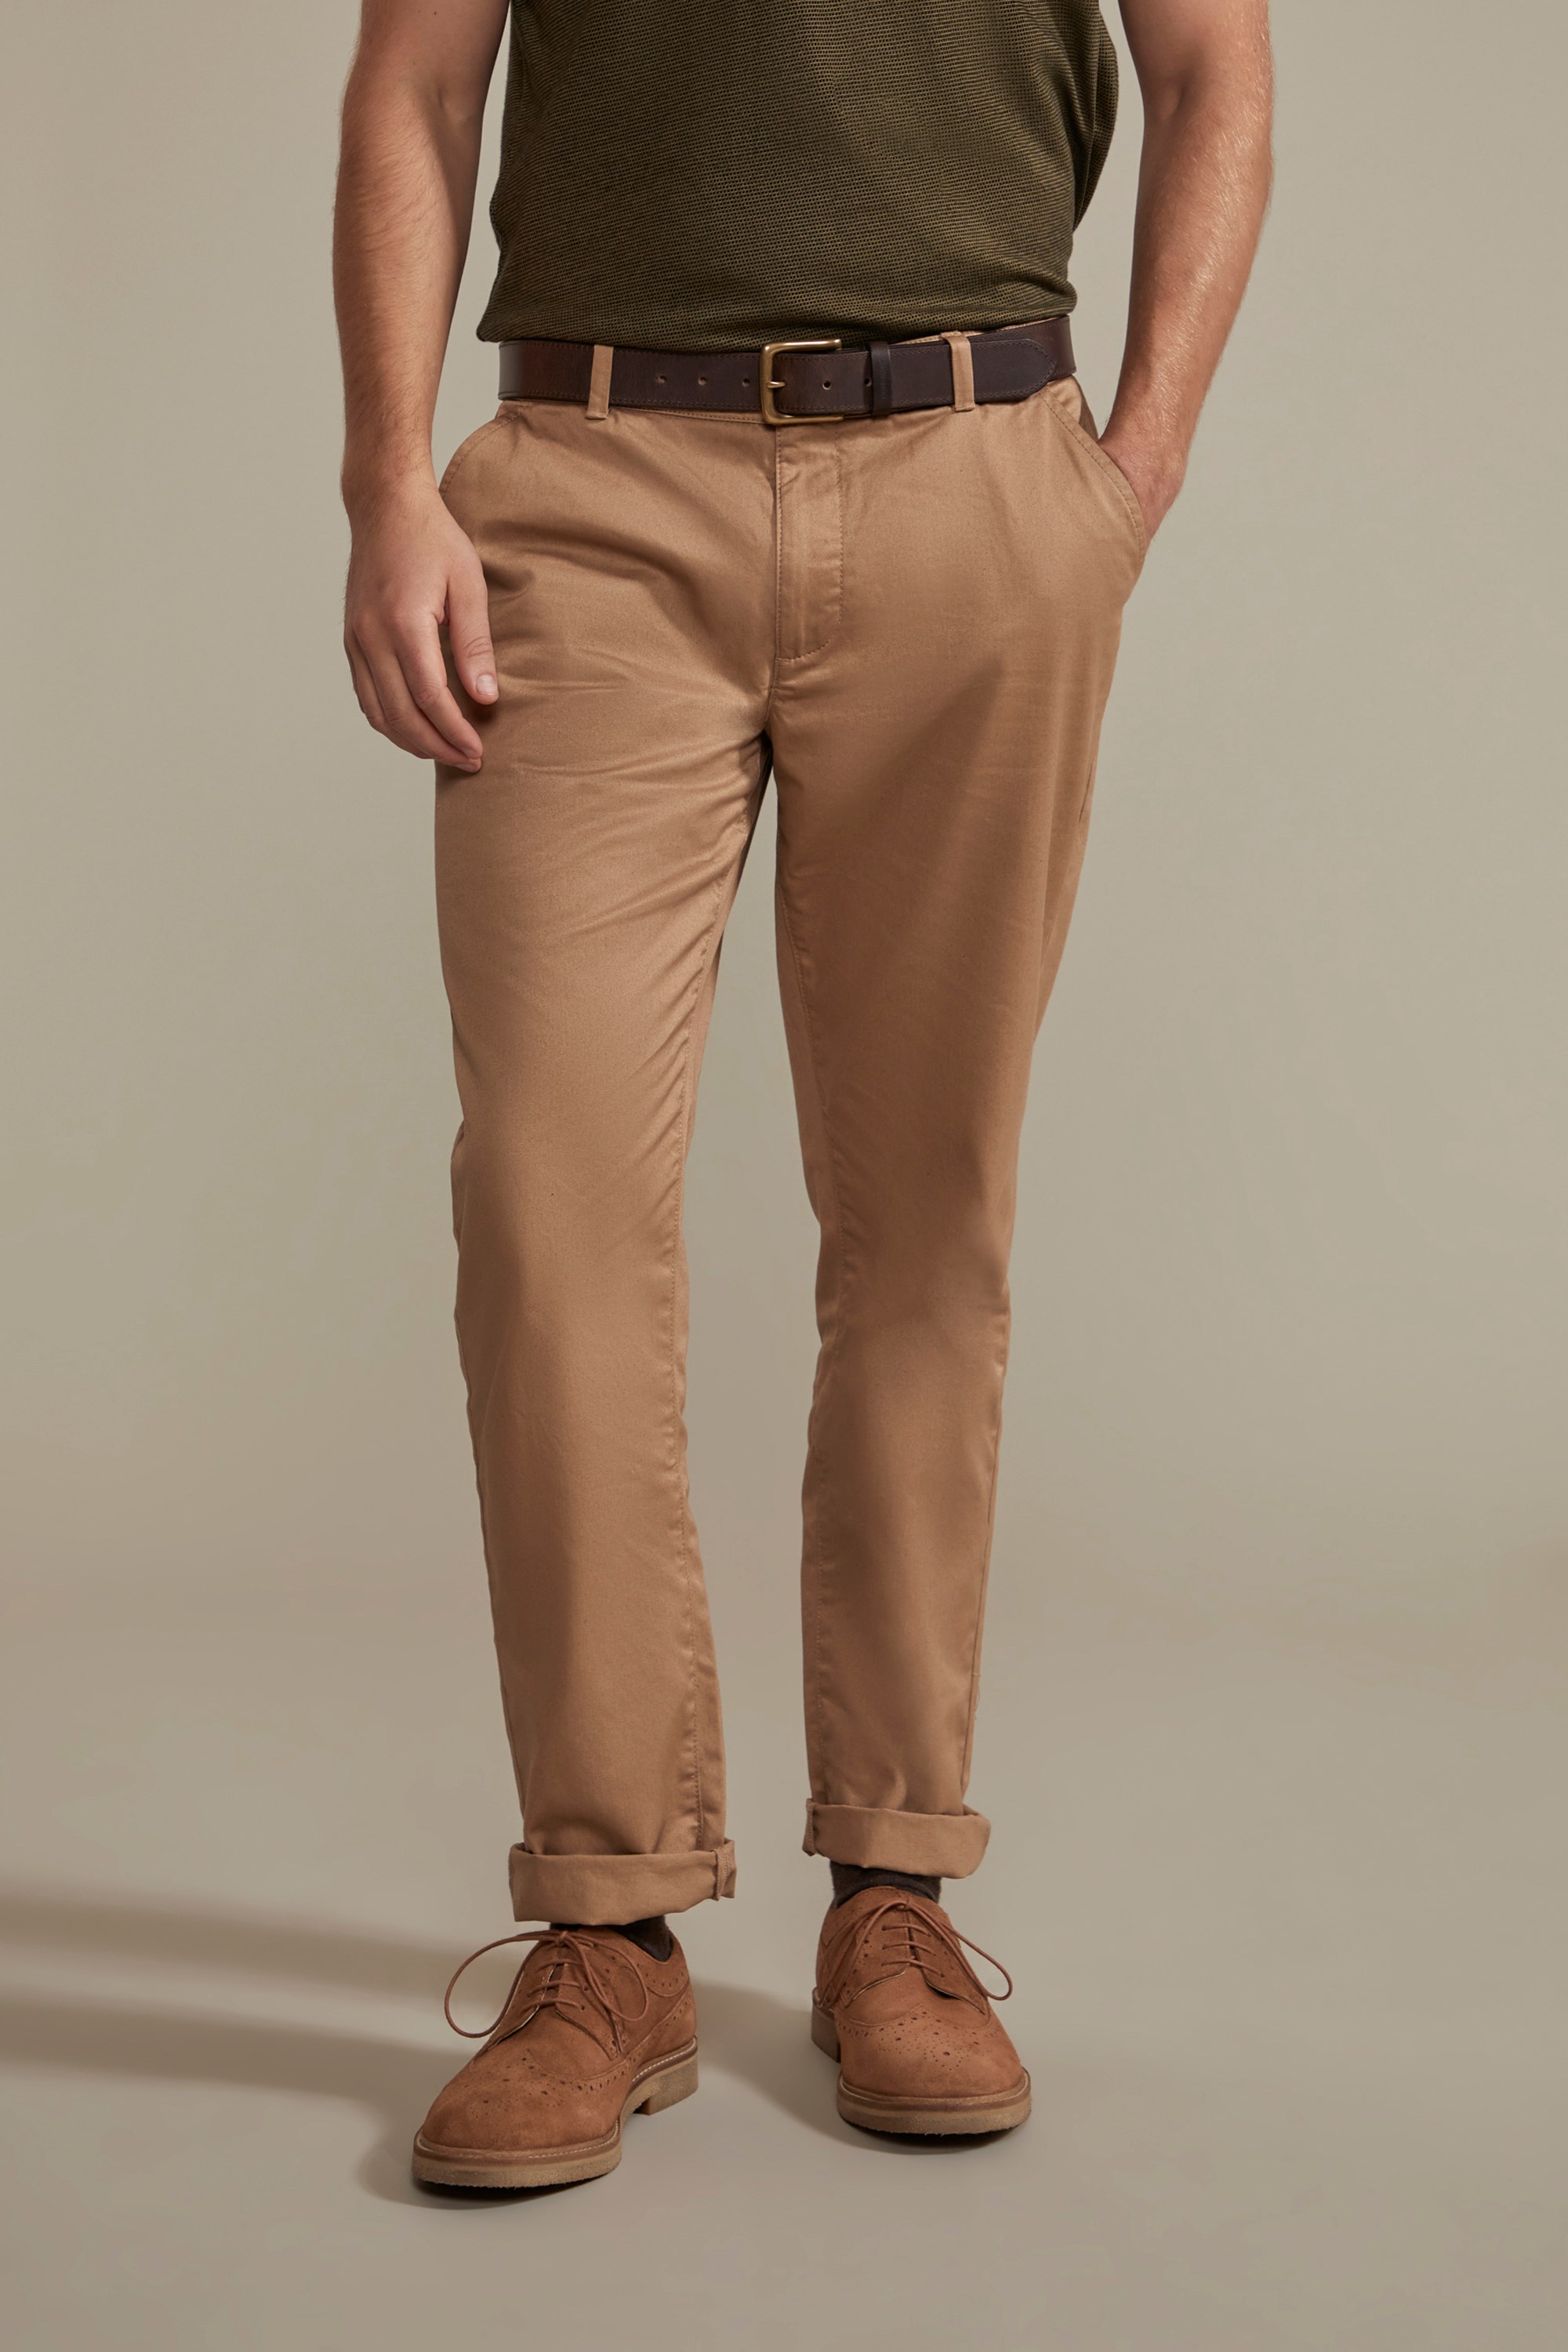 Oban Mens Cotton Chino Trousers - Beige